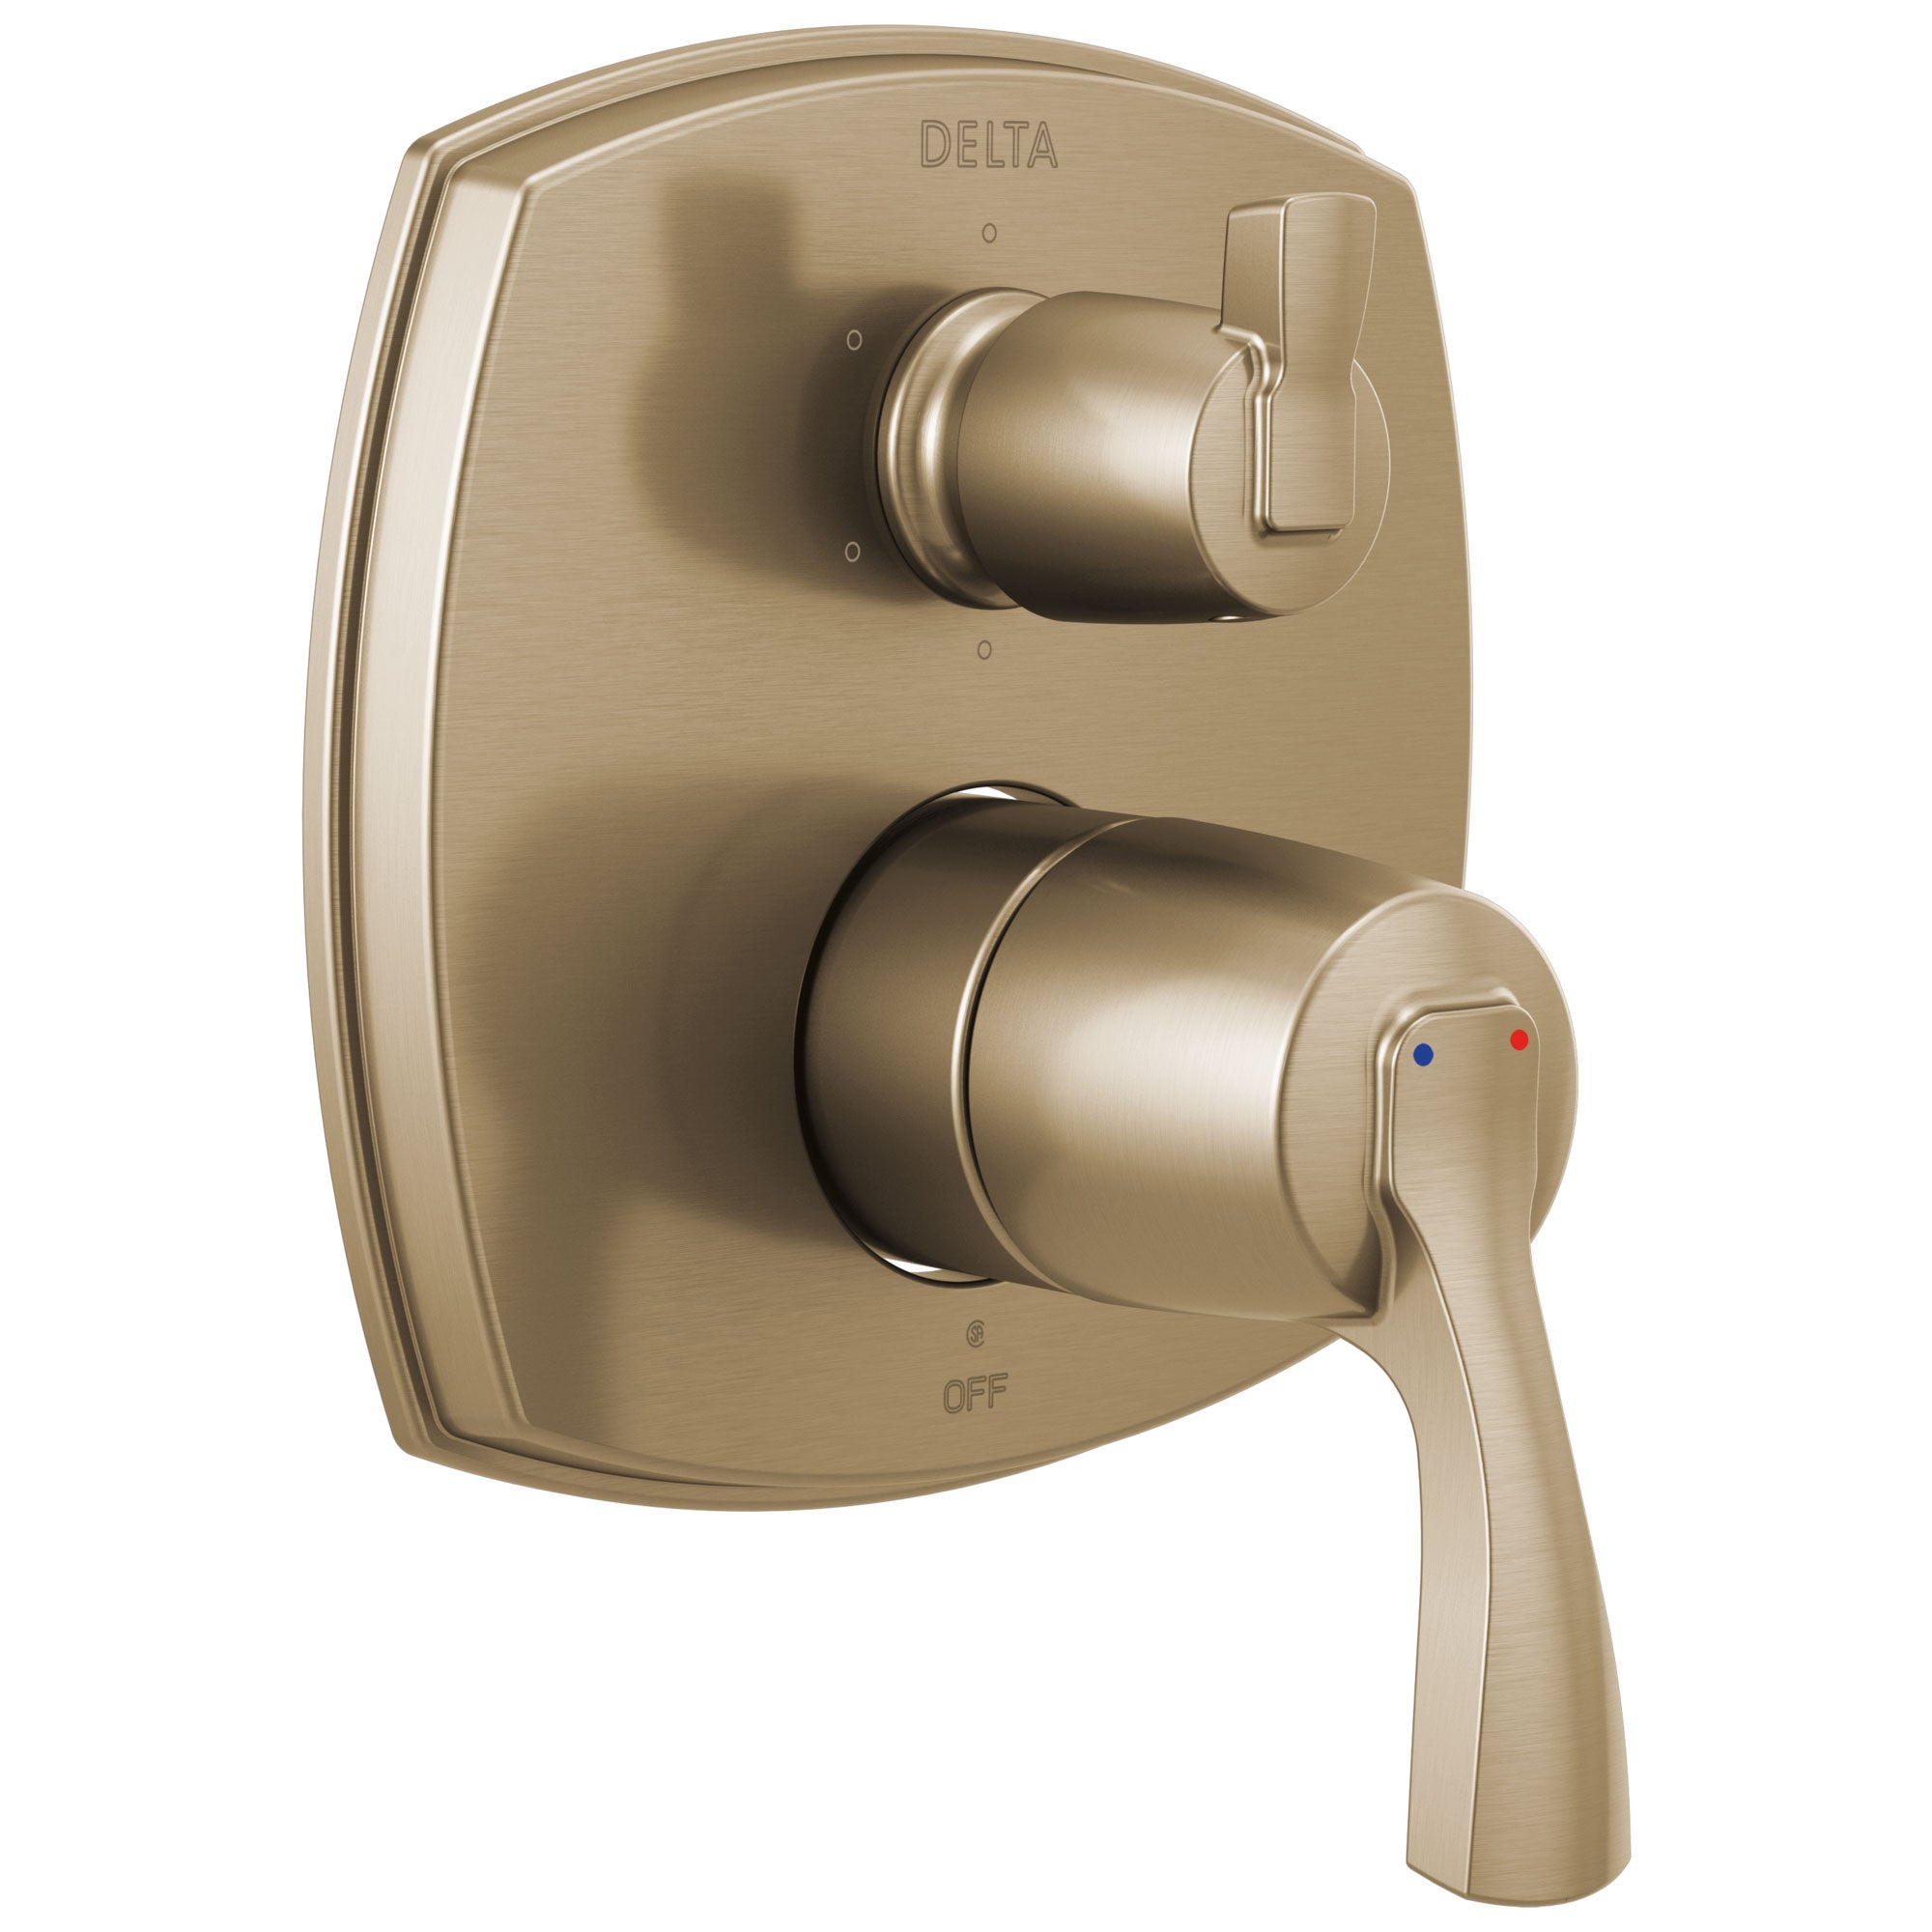 Delta Stryke Champagne Bronze Finish 14 Series Shower System Control with Integrated 6 Setting Lever Handle Diverter Includes Valve and Handles D3179V